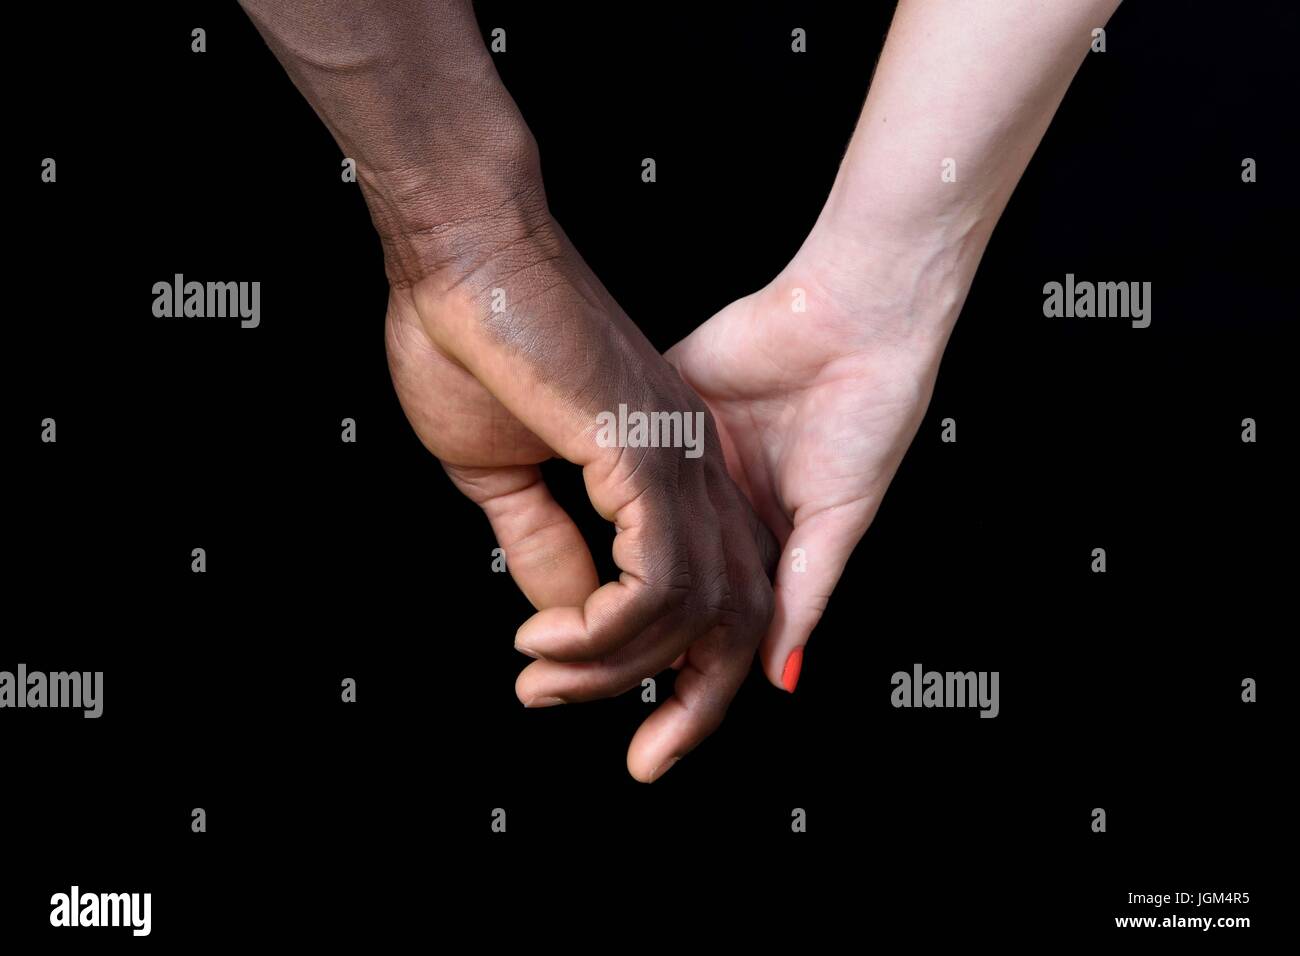 A Hands Of Black Man And White Woman On Black Background Stock